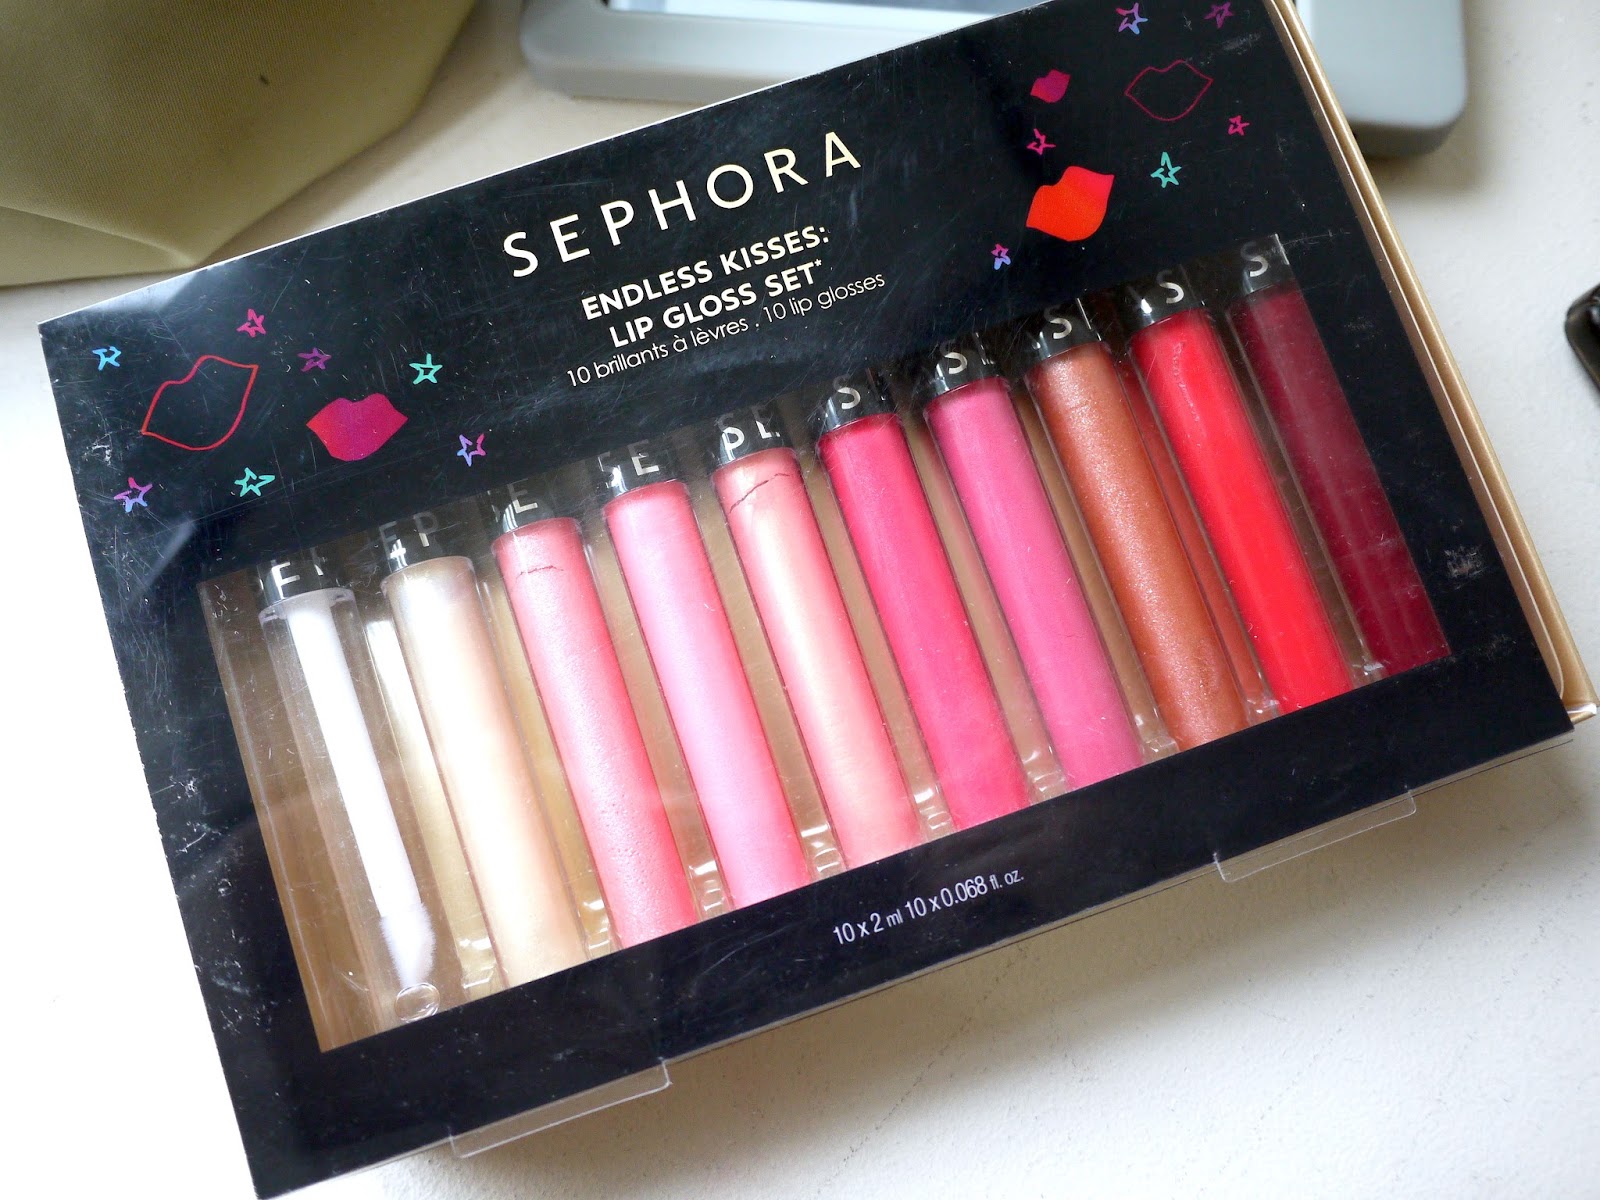 Sephora Endless Kisses: Lip Gloss Set review and swatch